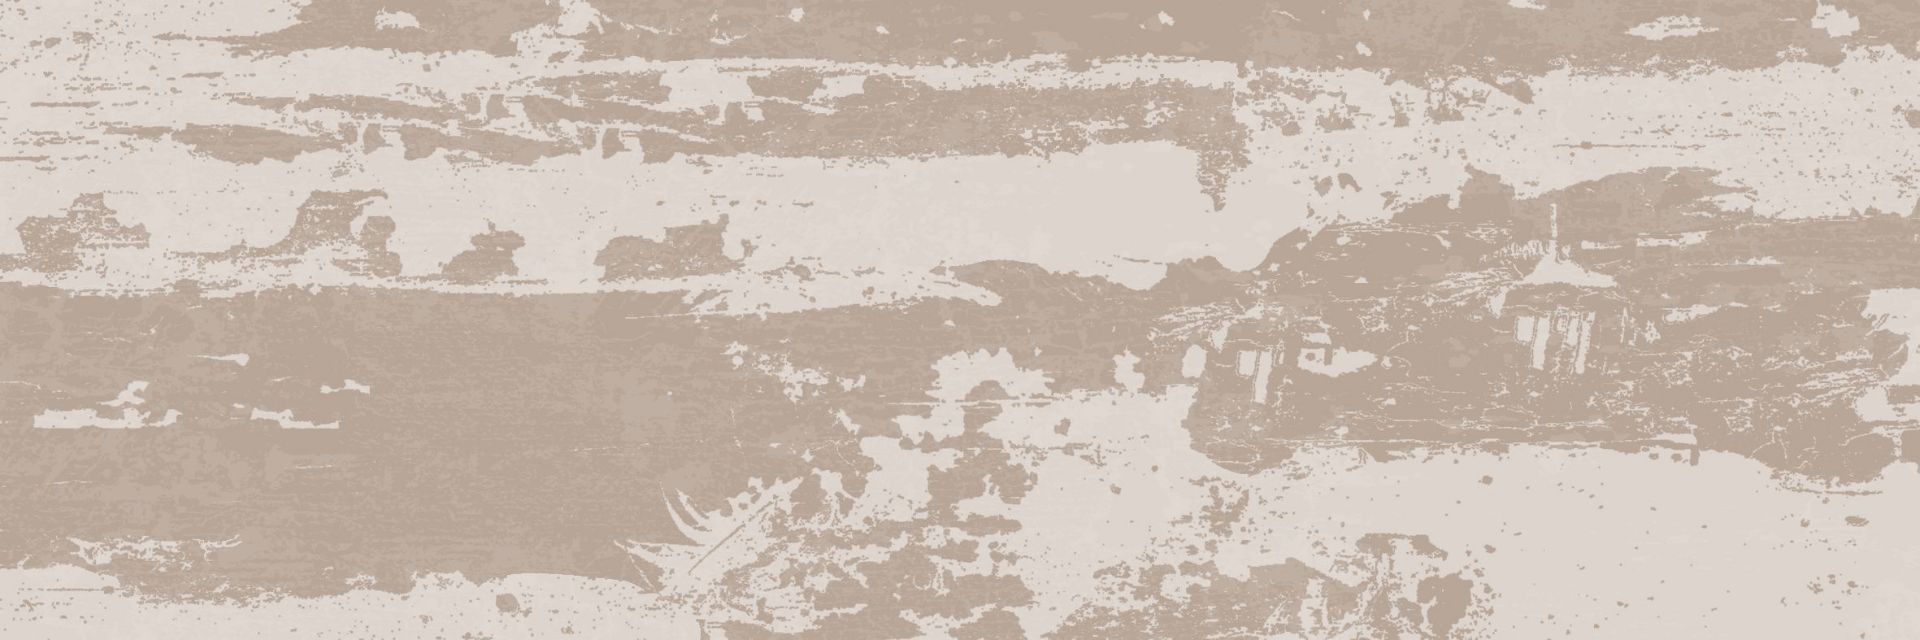 5.1m2 Aura Taupe Satin Ceramic Wall tile. (L)300mm (W)100mm per tile. Influenced by interior tr... - Image 2 of 5